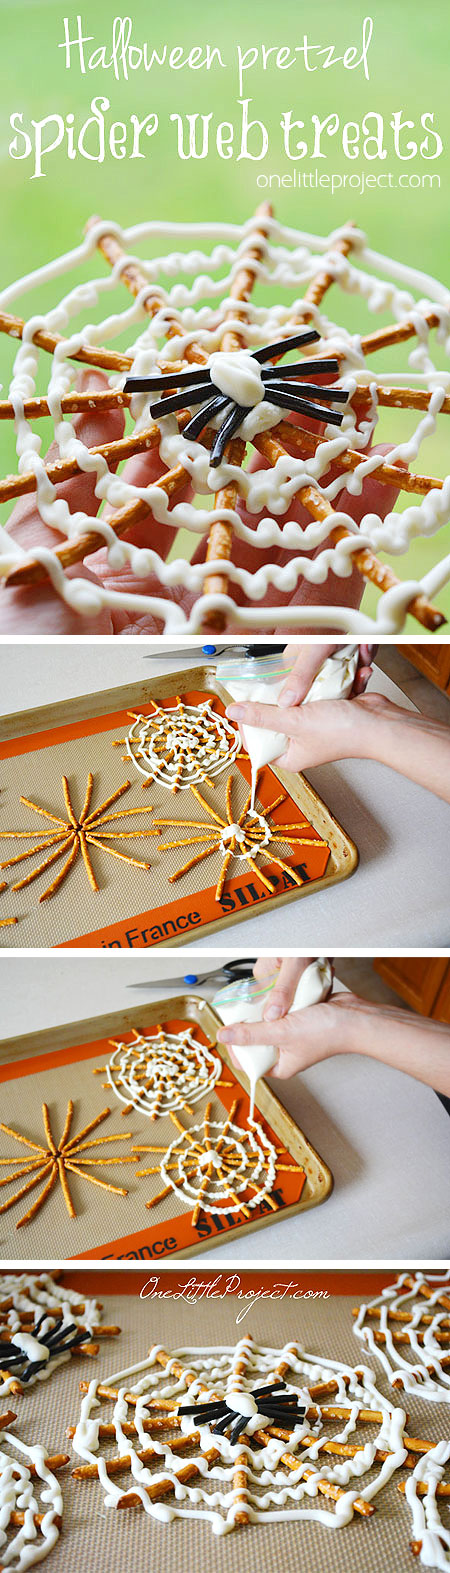 These Halloween pretzel spider webs are SO CUTE! They have to be the coolest Halloween snack ever!